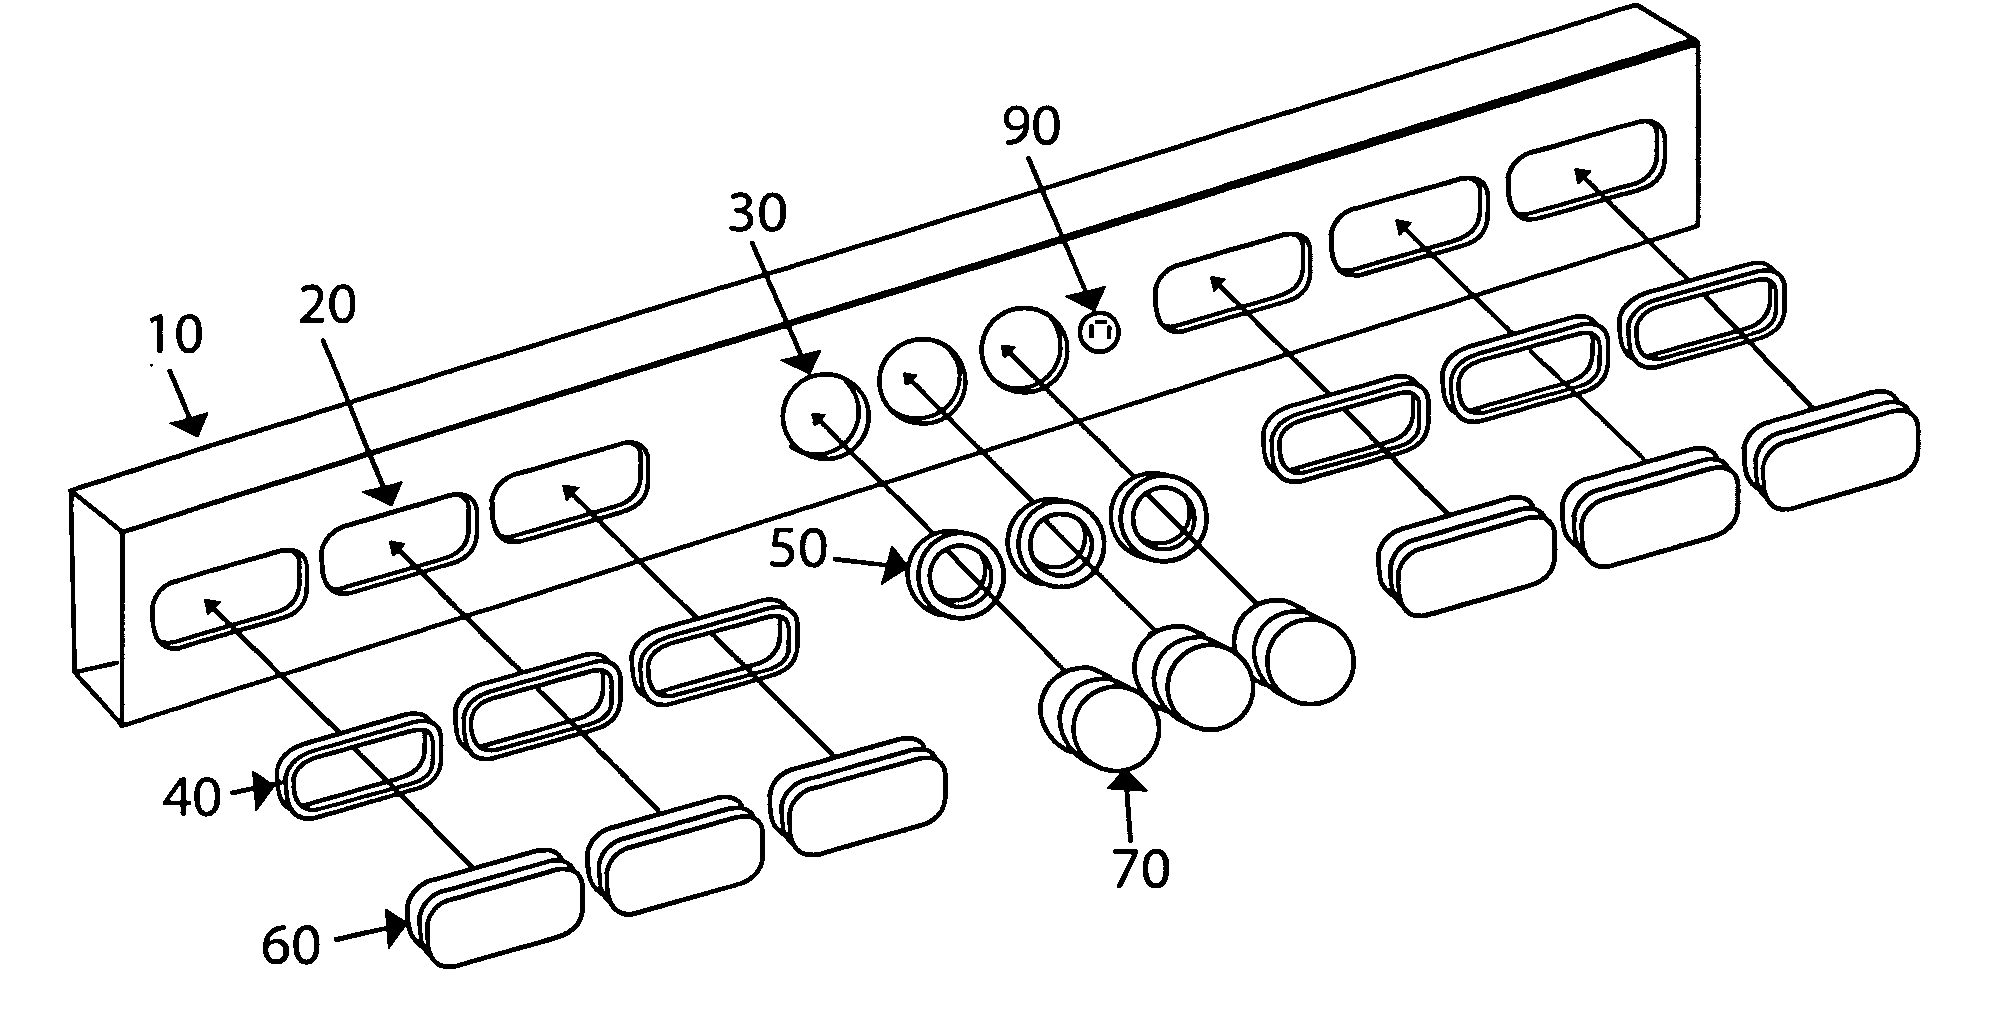 Combination safety light bar signal assembly and method